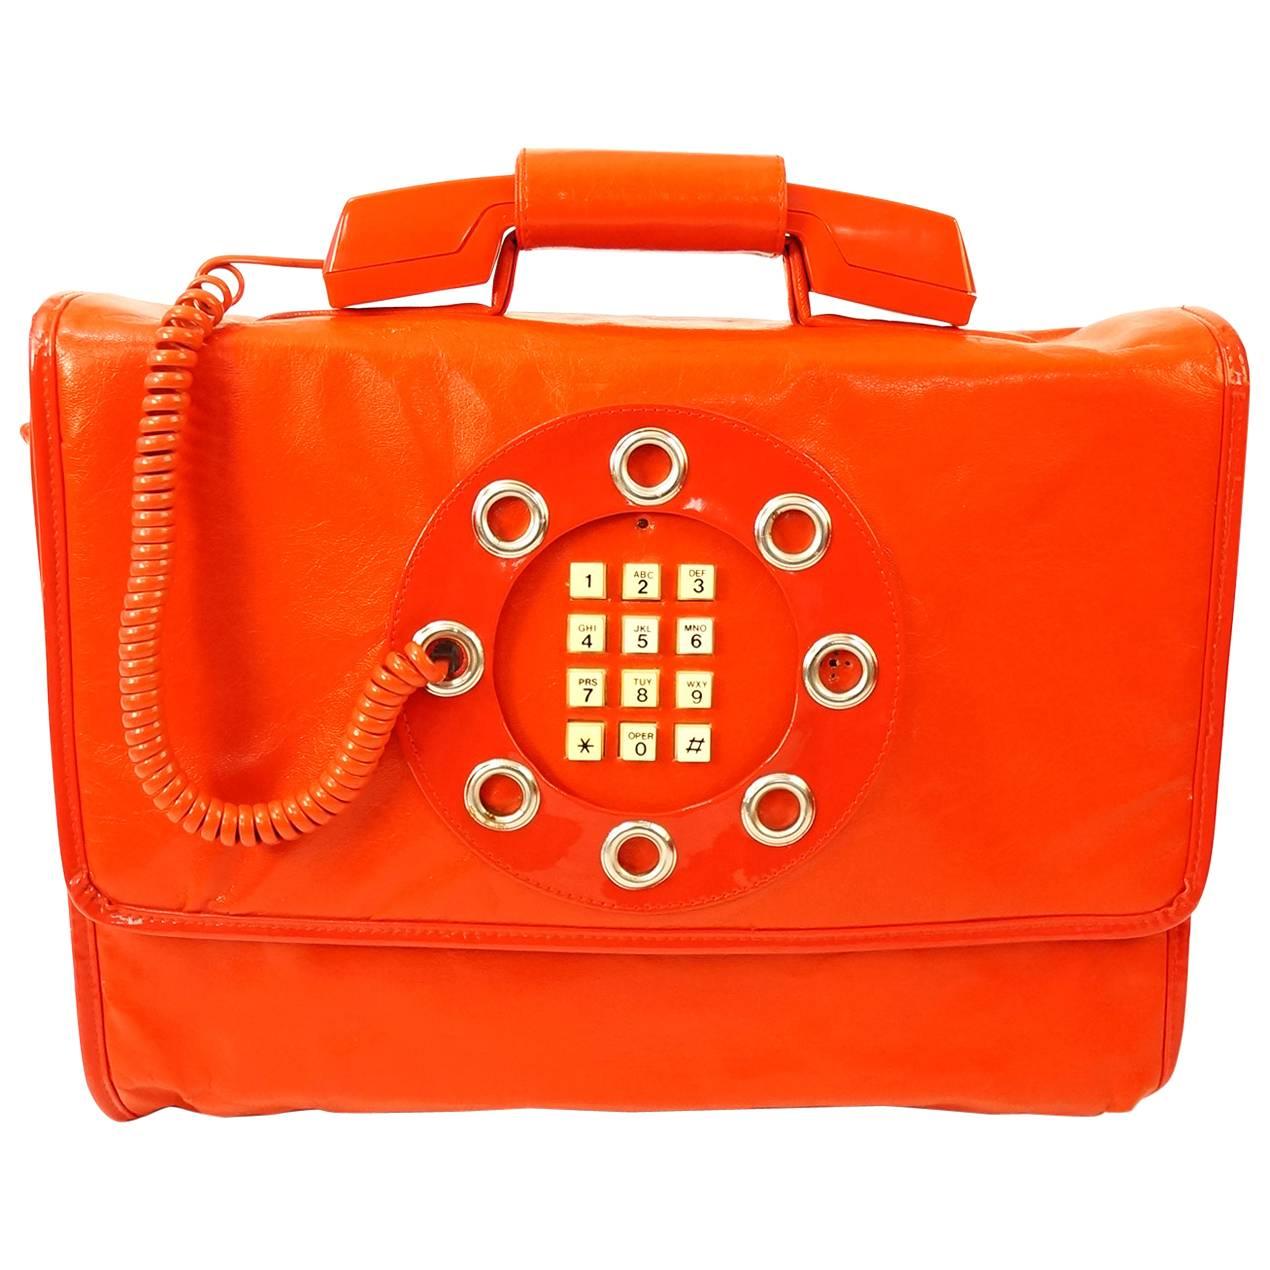 1970s Dallas Handbags' ”Phone” Directory Red Leather Purse NWT